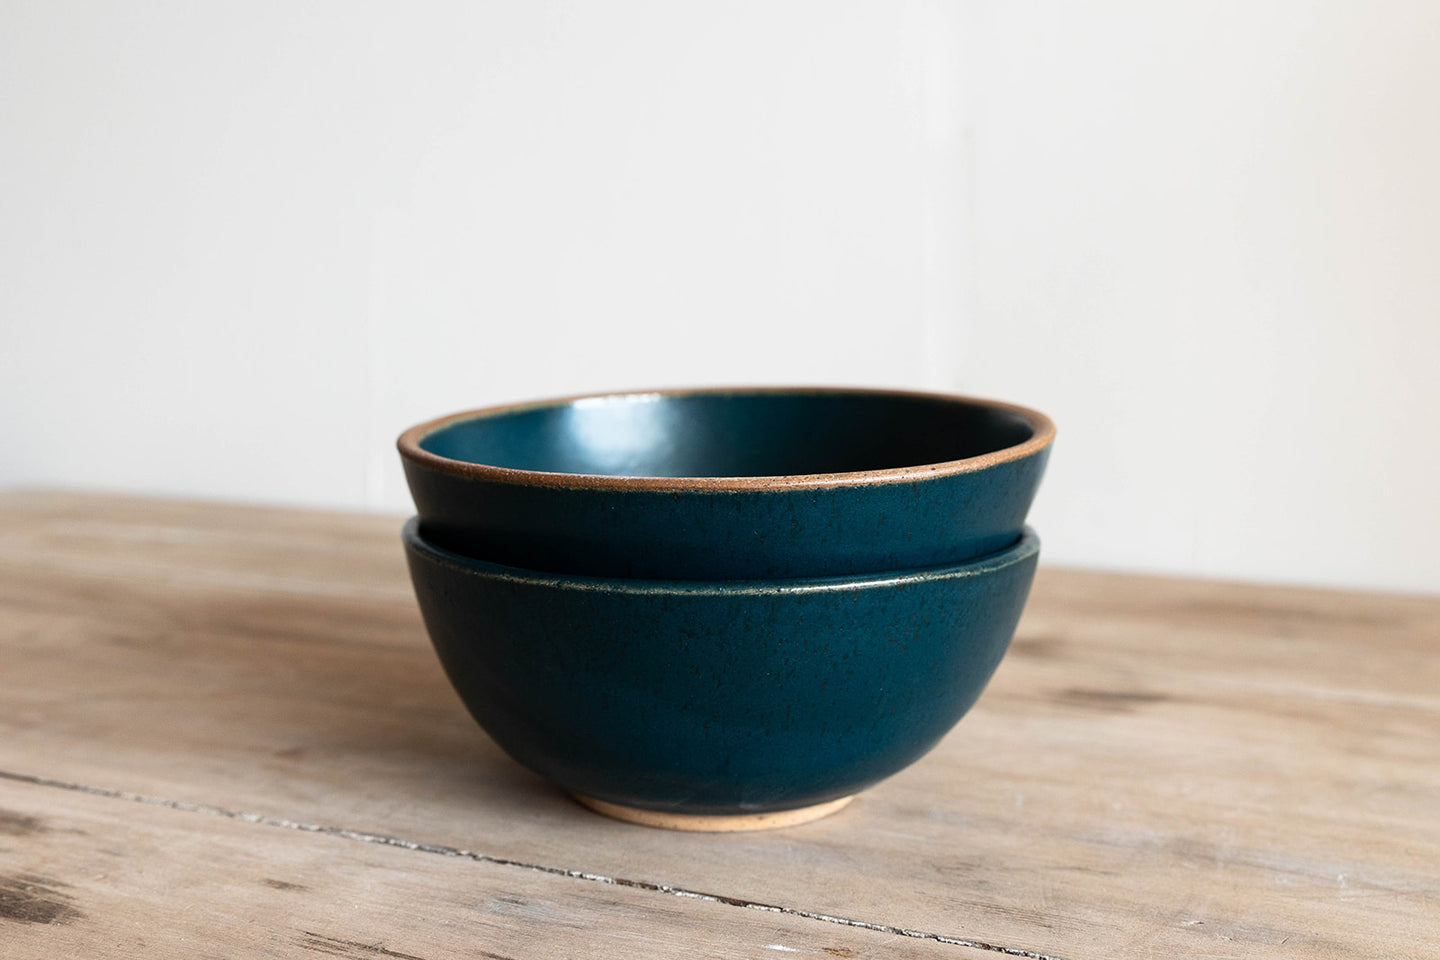 New glaze colors - Cereal bowl